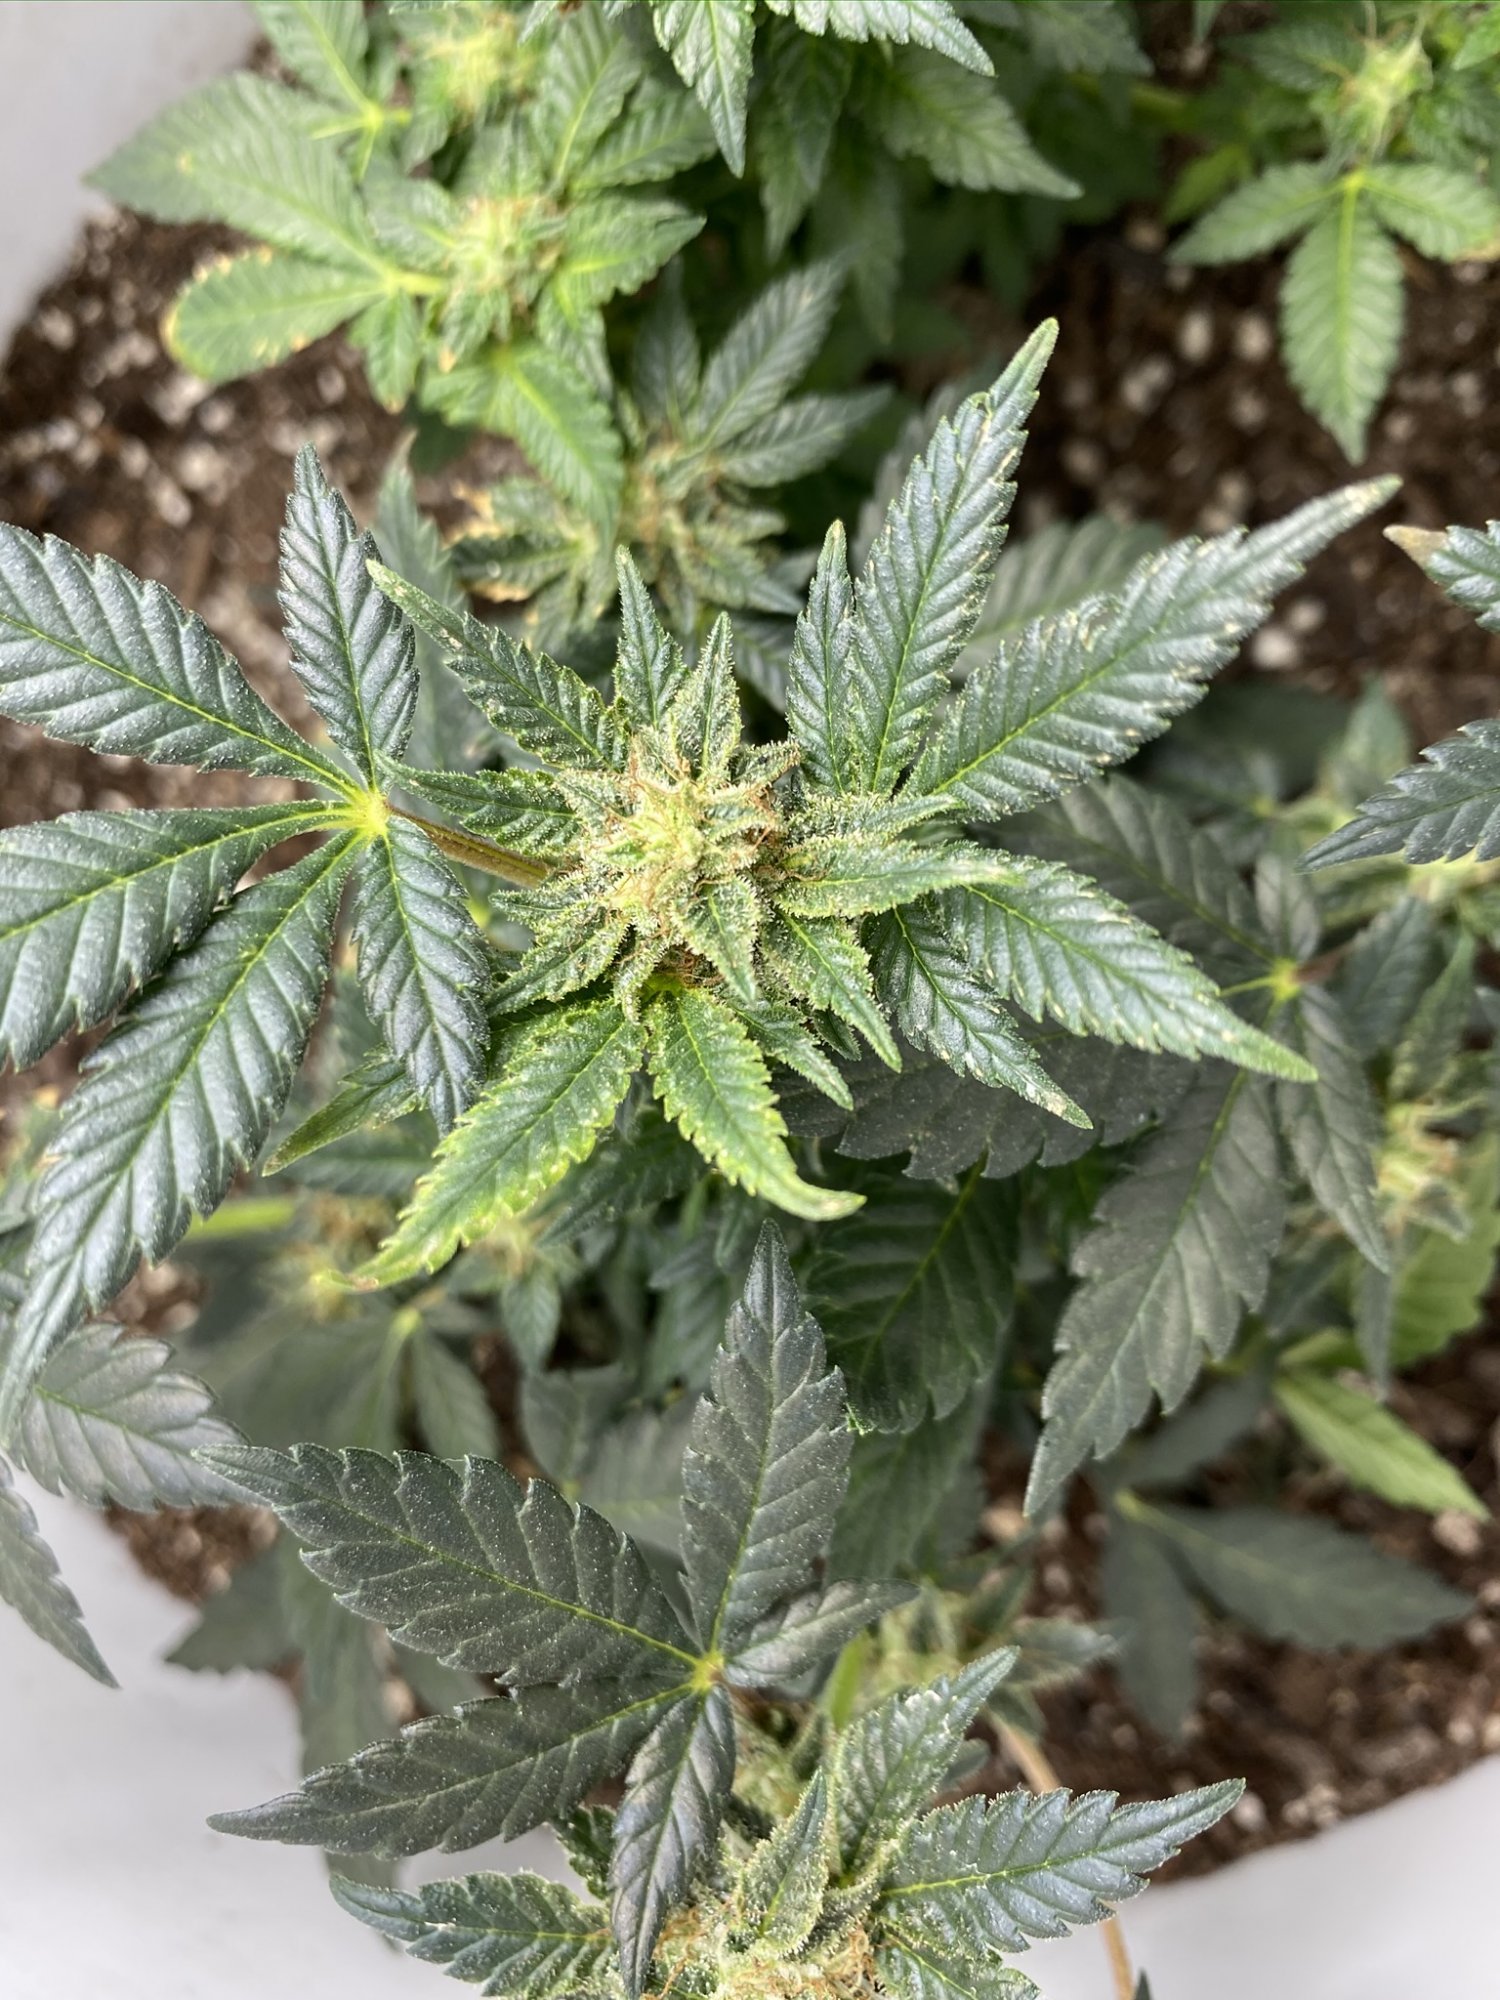 Help with harvest timing